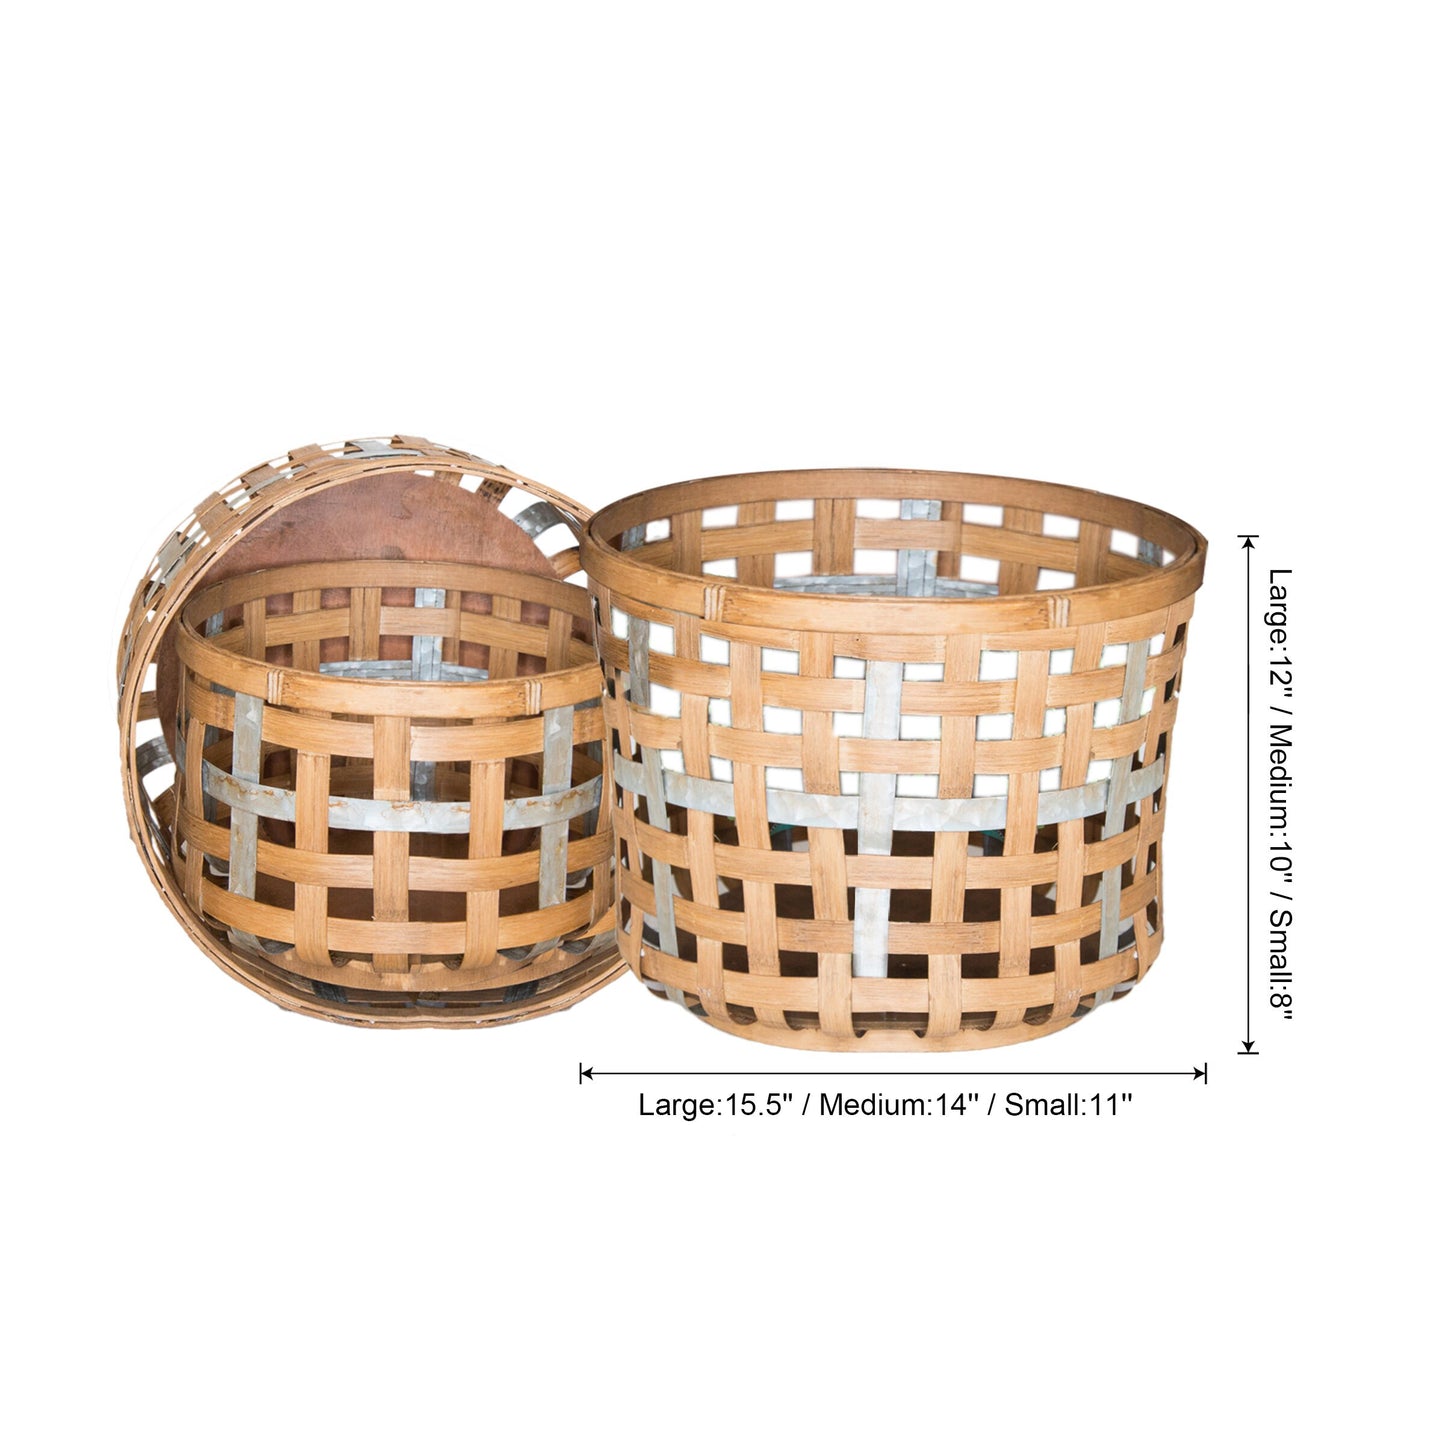 Set of 3 Woven Storage Baskets with Metal Decor Band